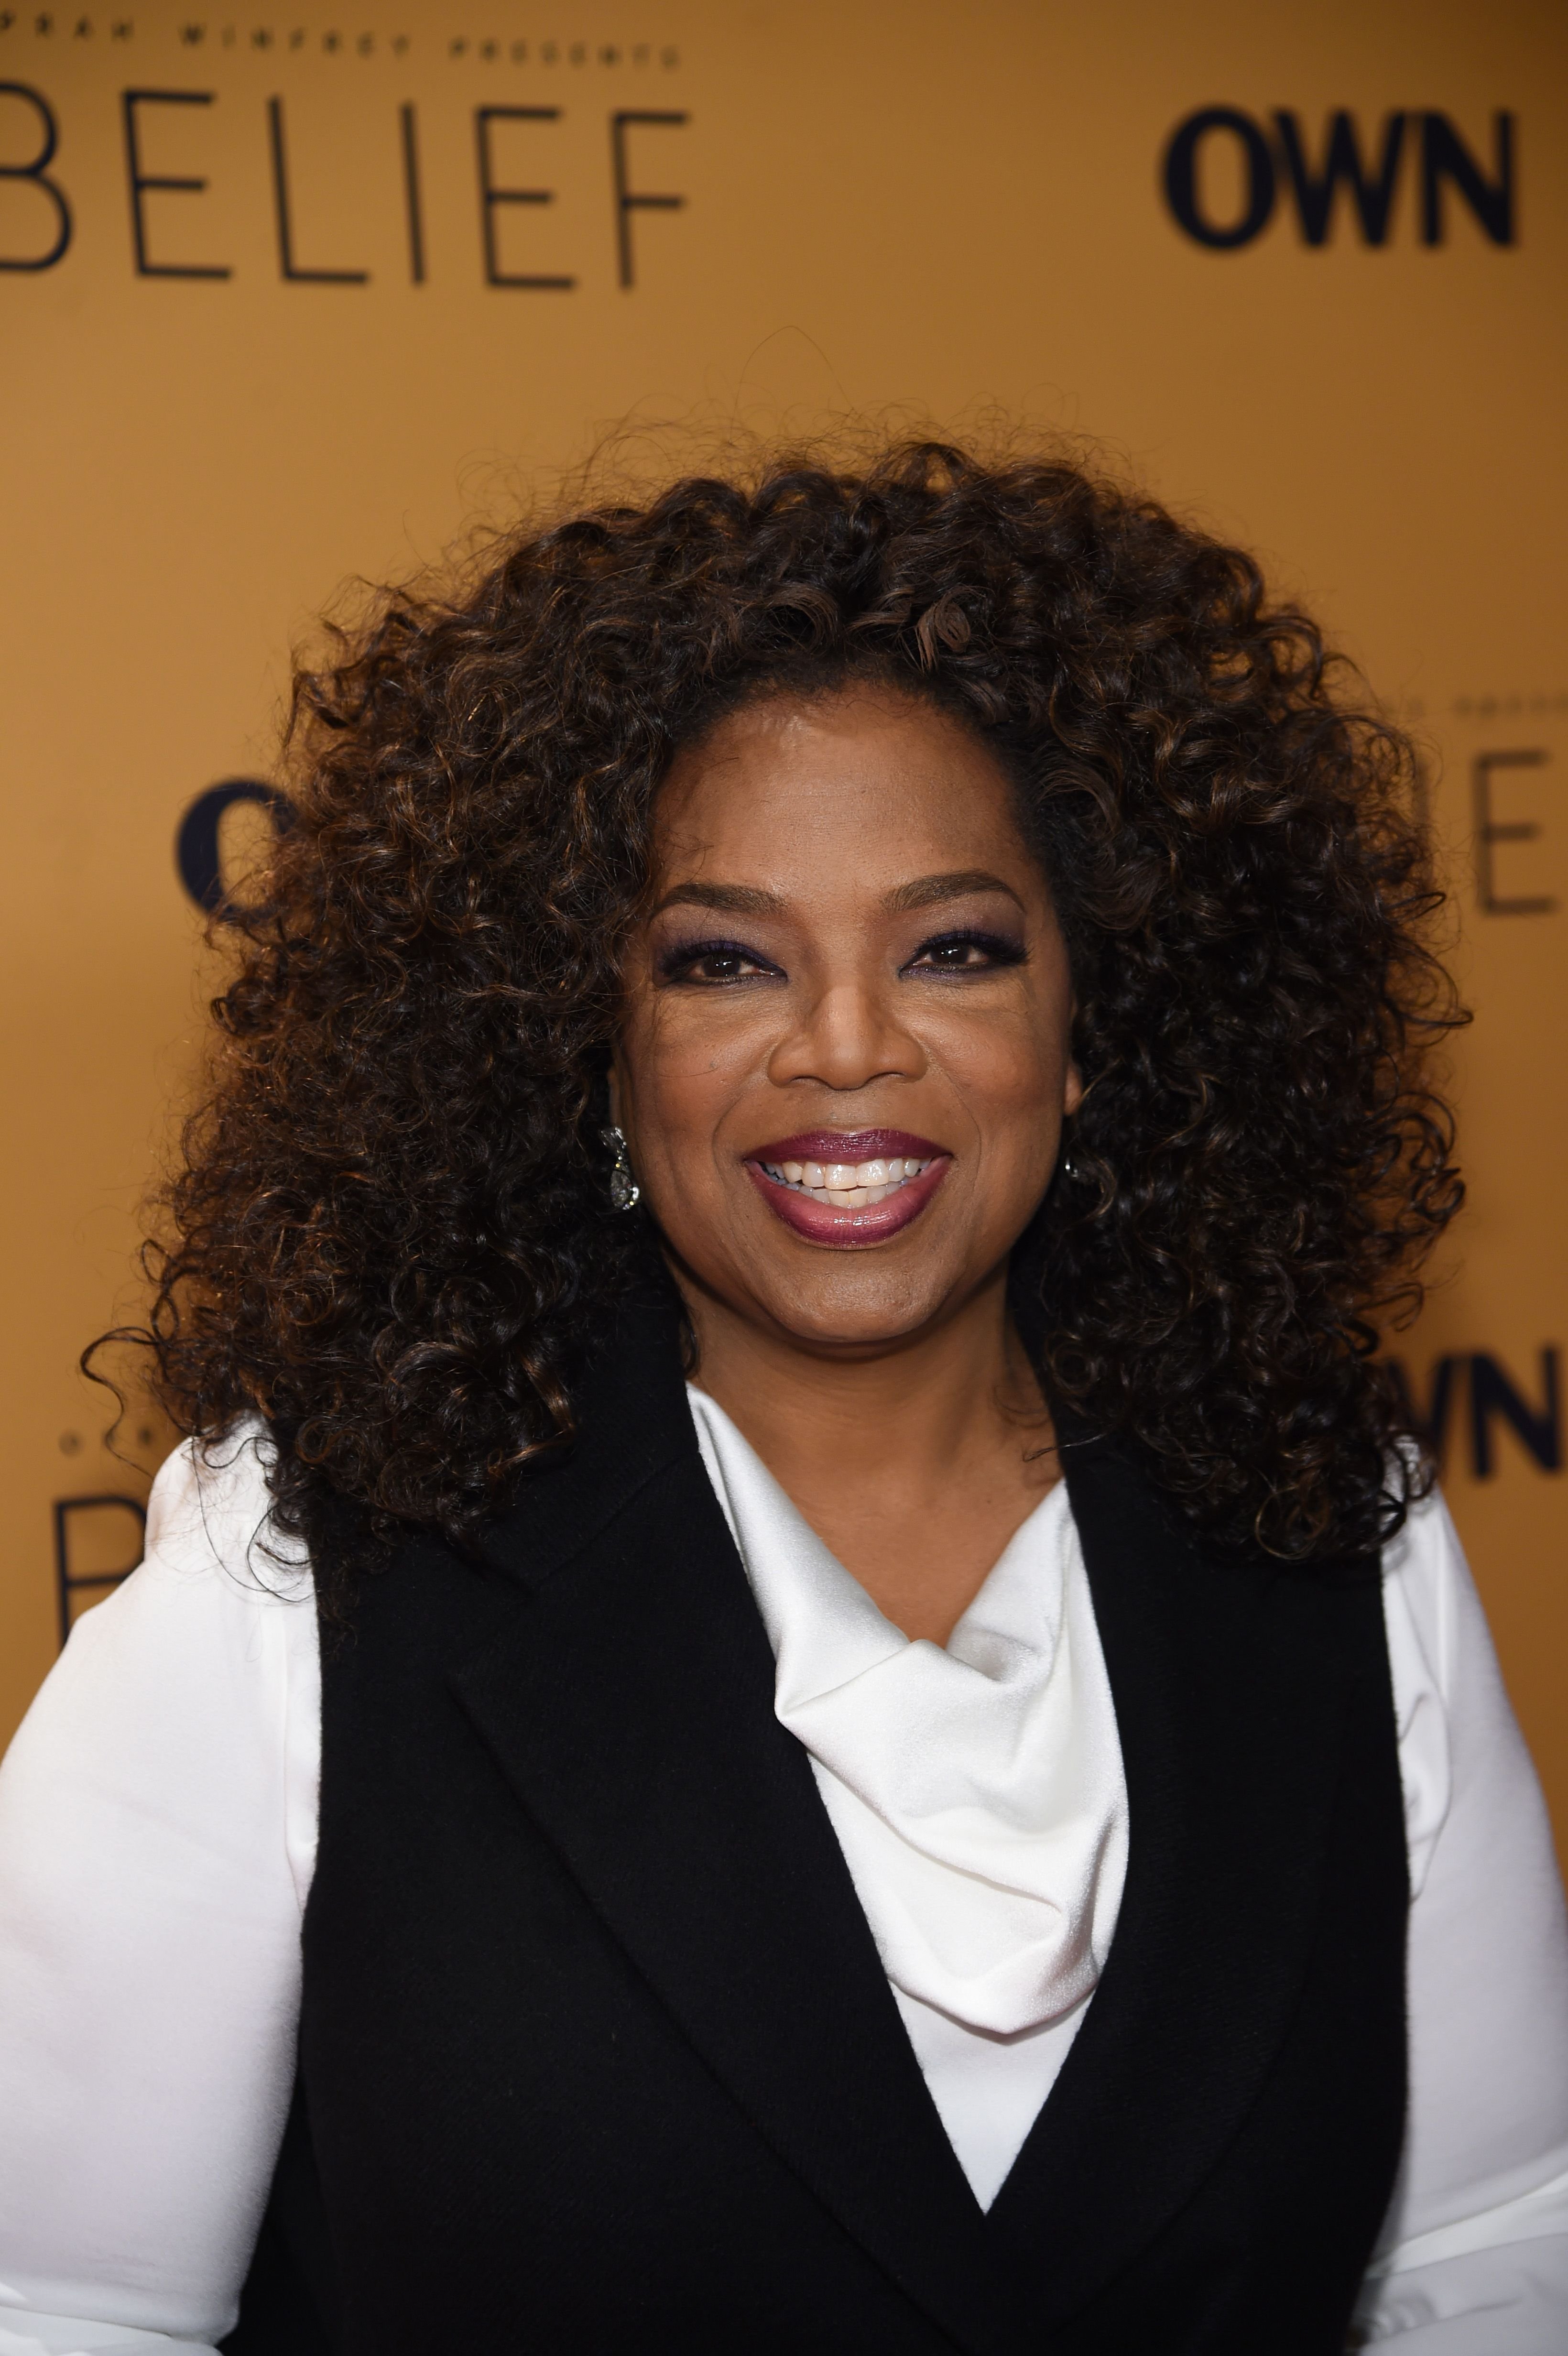 Oprah Winfrey attends the "Belief" New York premiere at TheTimesCenter | Photo: Getty Images